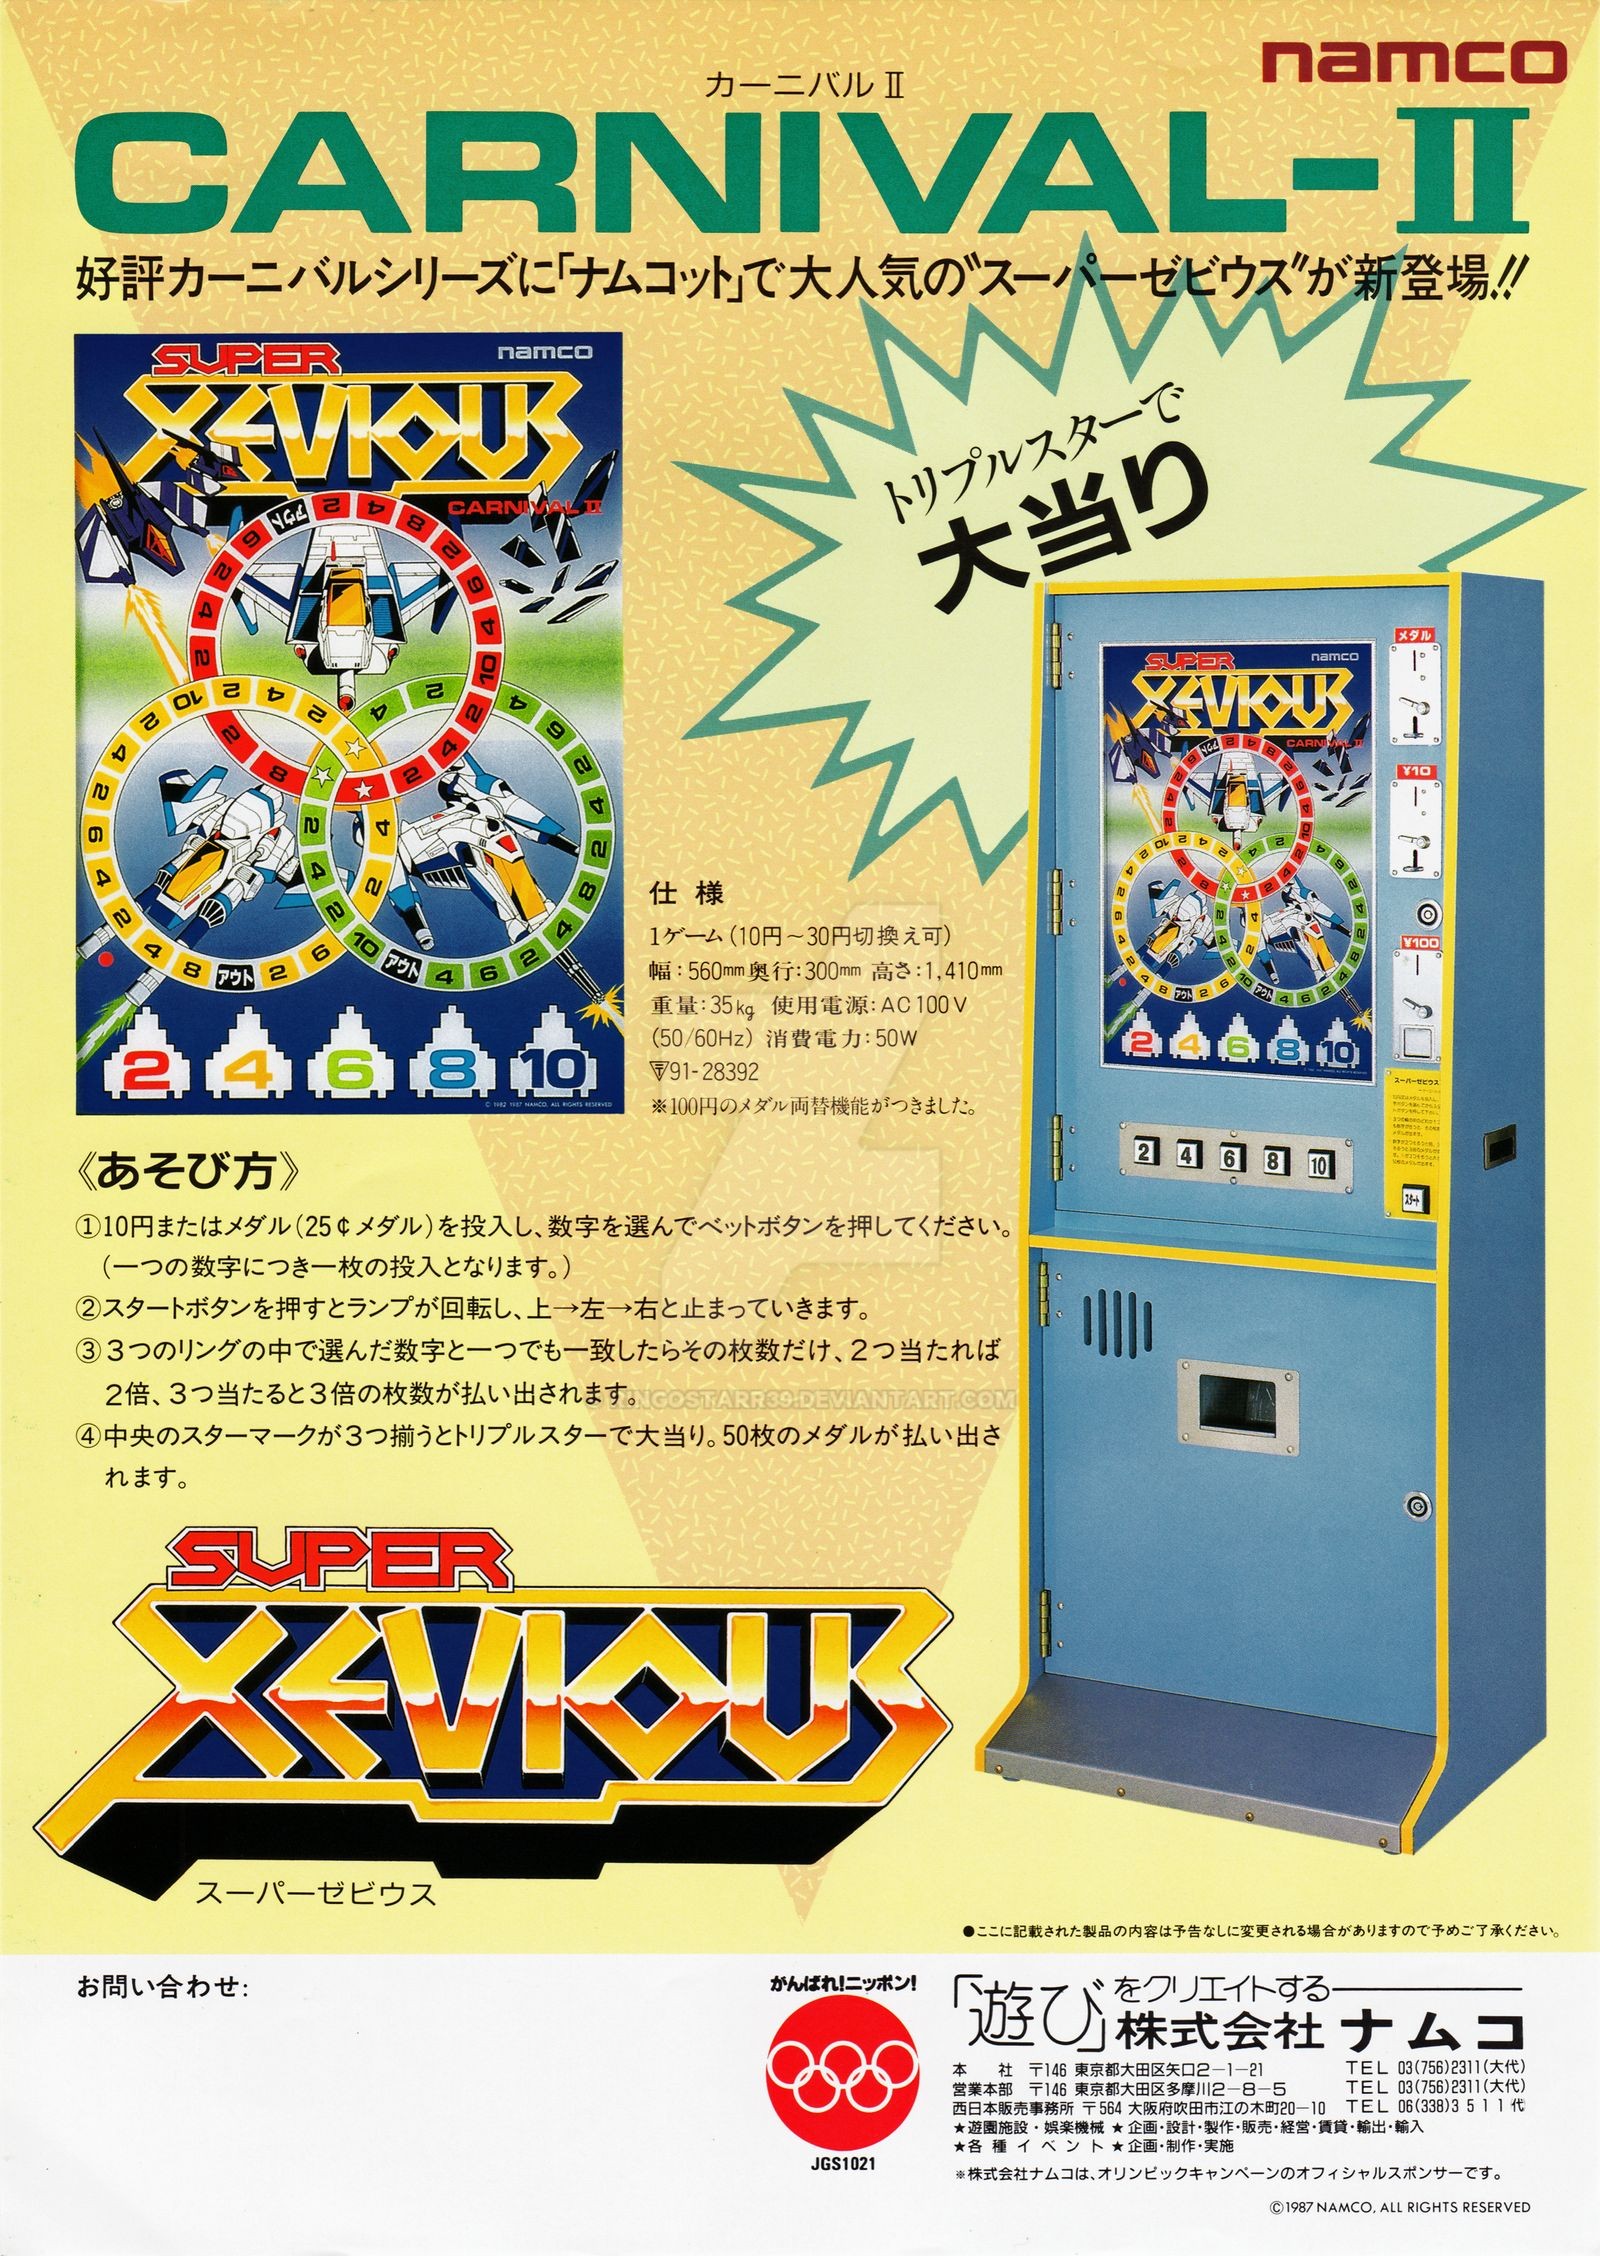 Carnival Ii Super Xevious Flyer By Ringostarr39